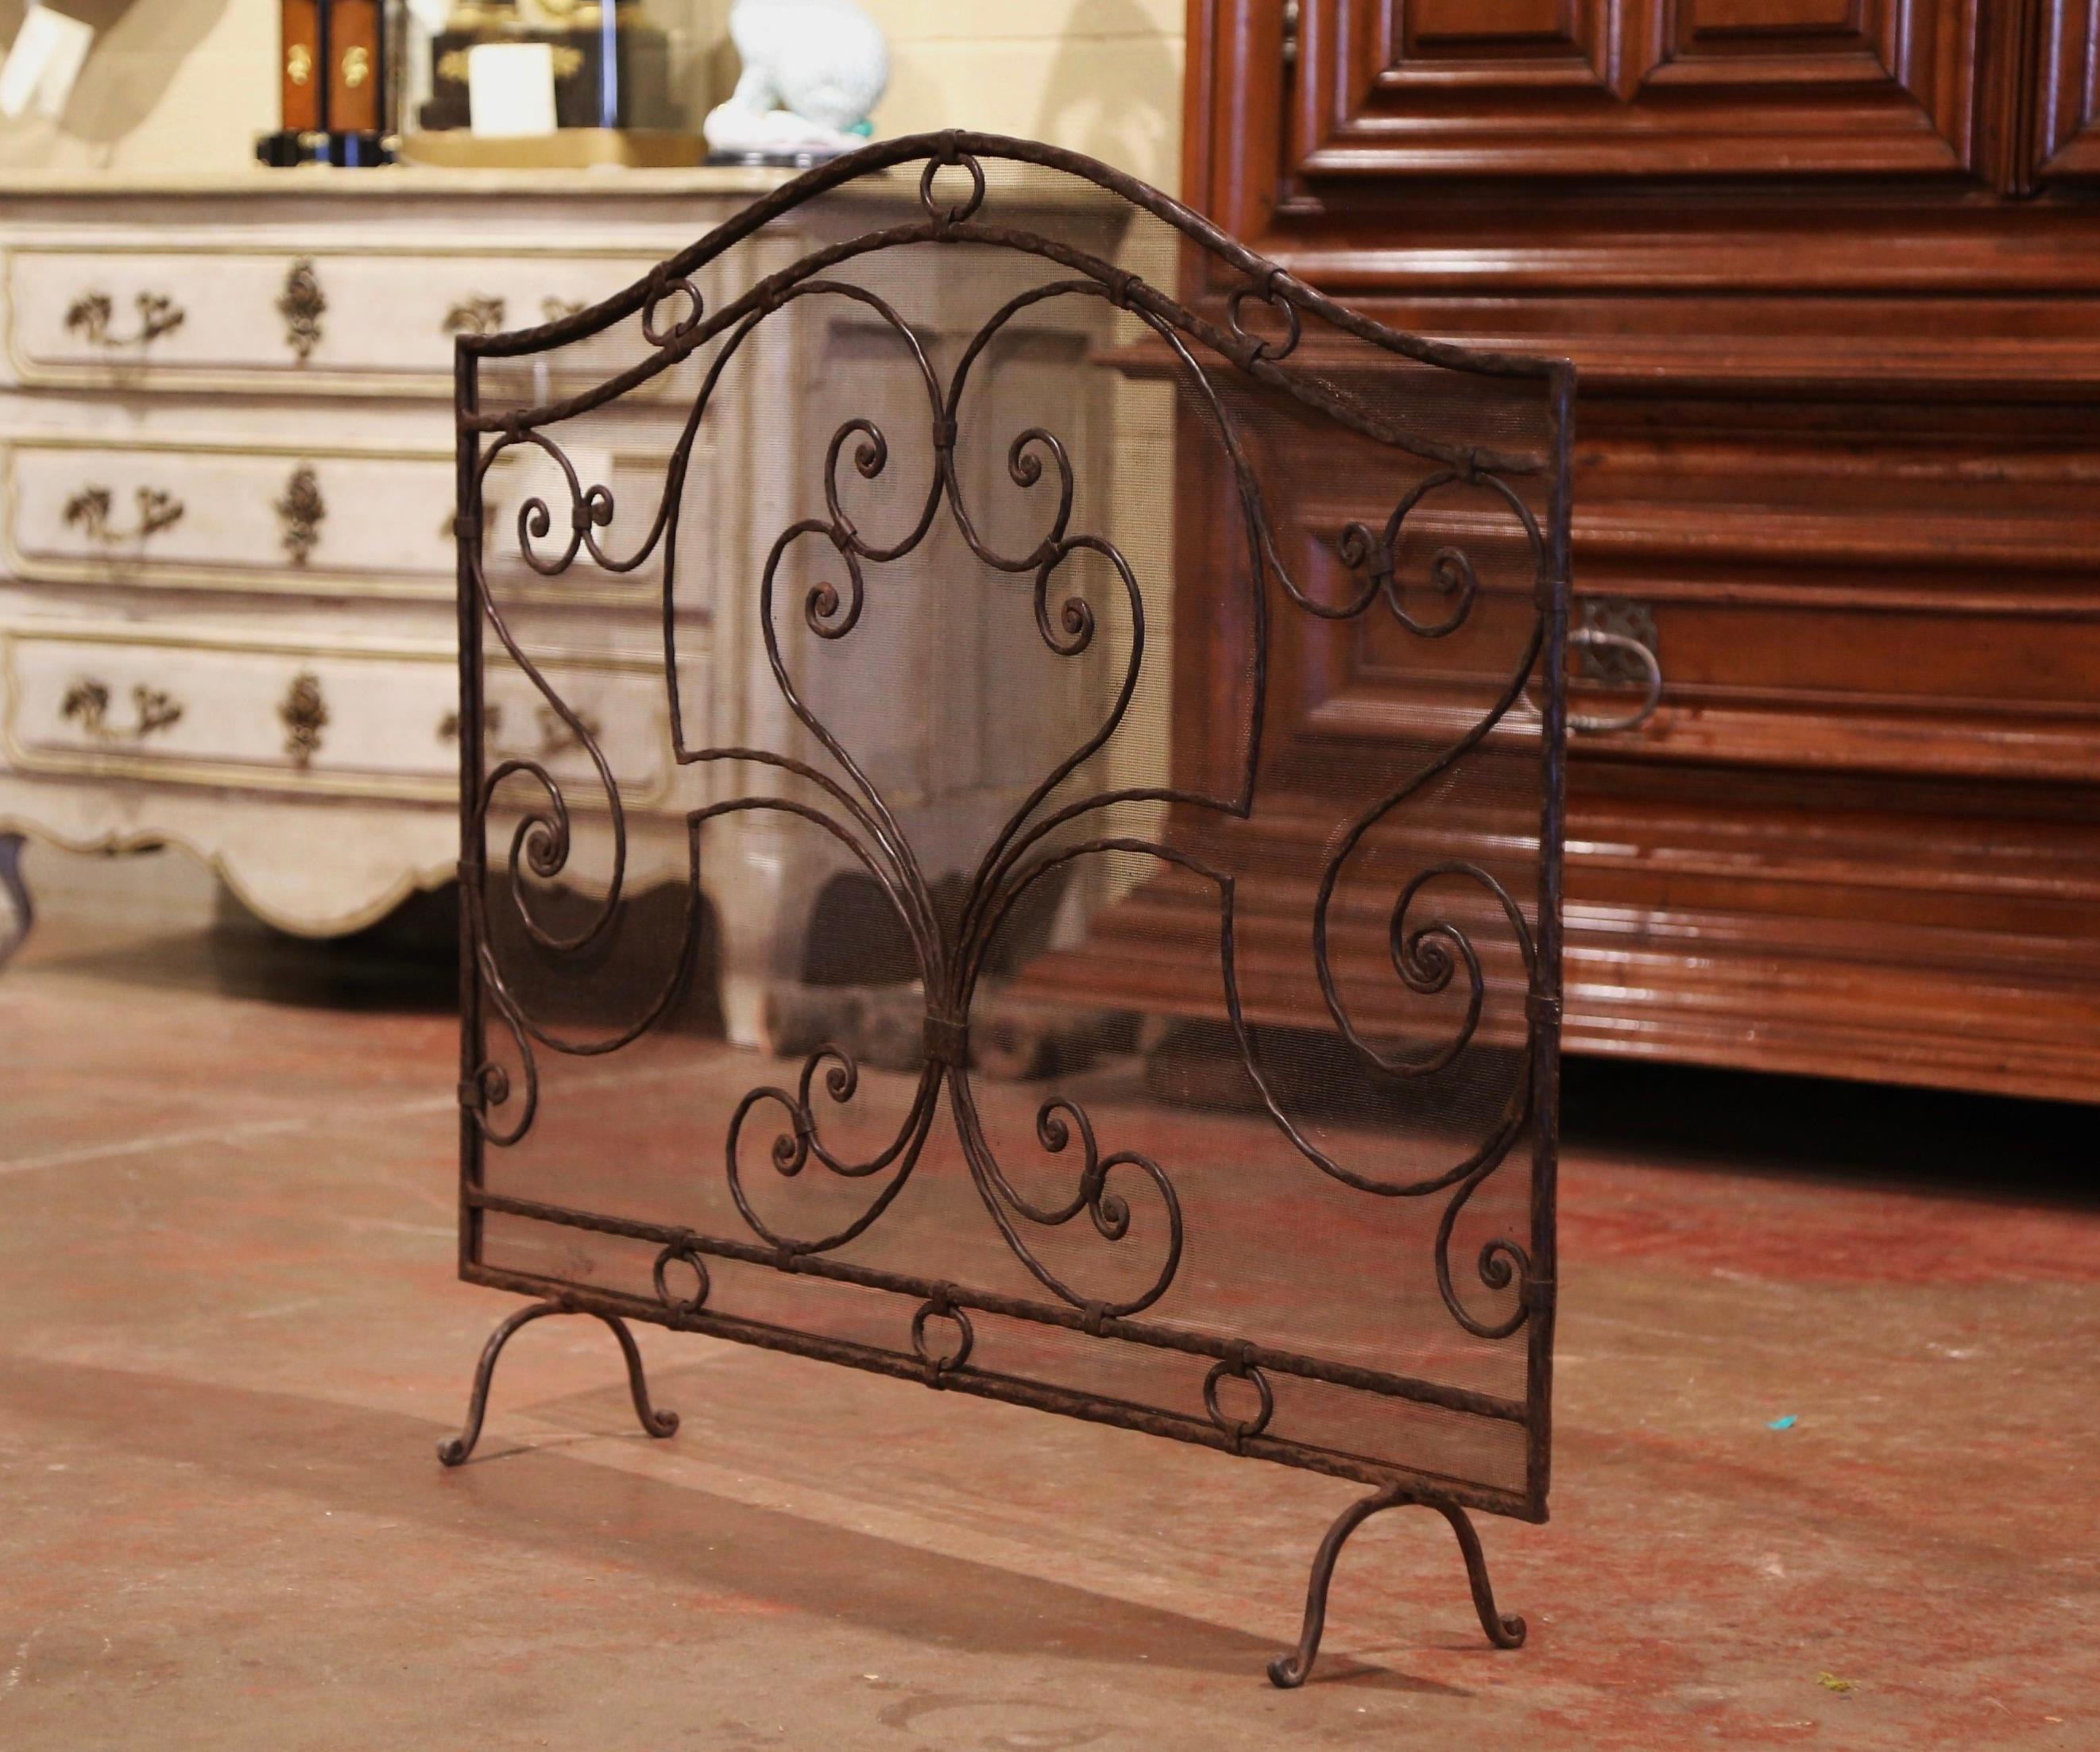 Decorate a fireplace hearth with this elegant iron screen. Created in France circa 1970 and standing on small scrolled feet, the wrought iron piece features an arched top and is decorated with intricate forged scroll motifs. The fireplace essential